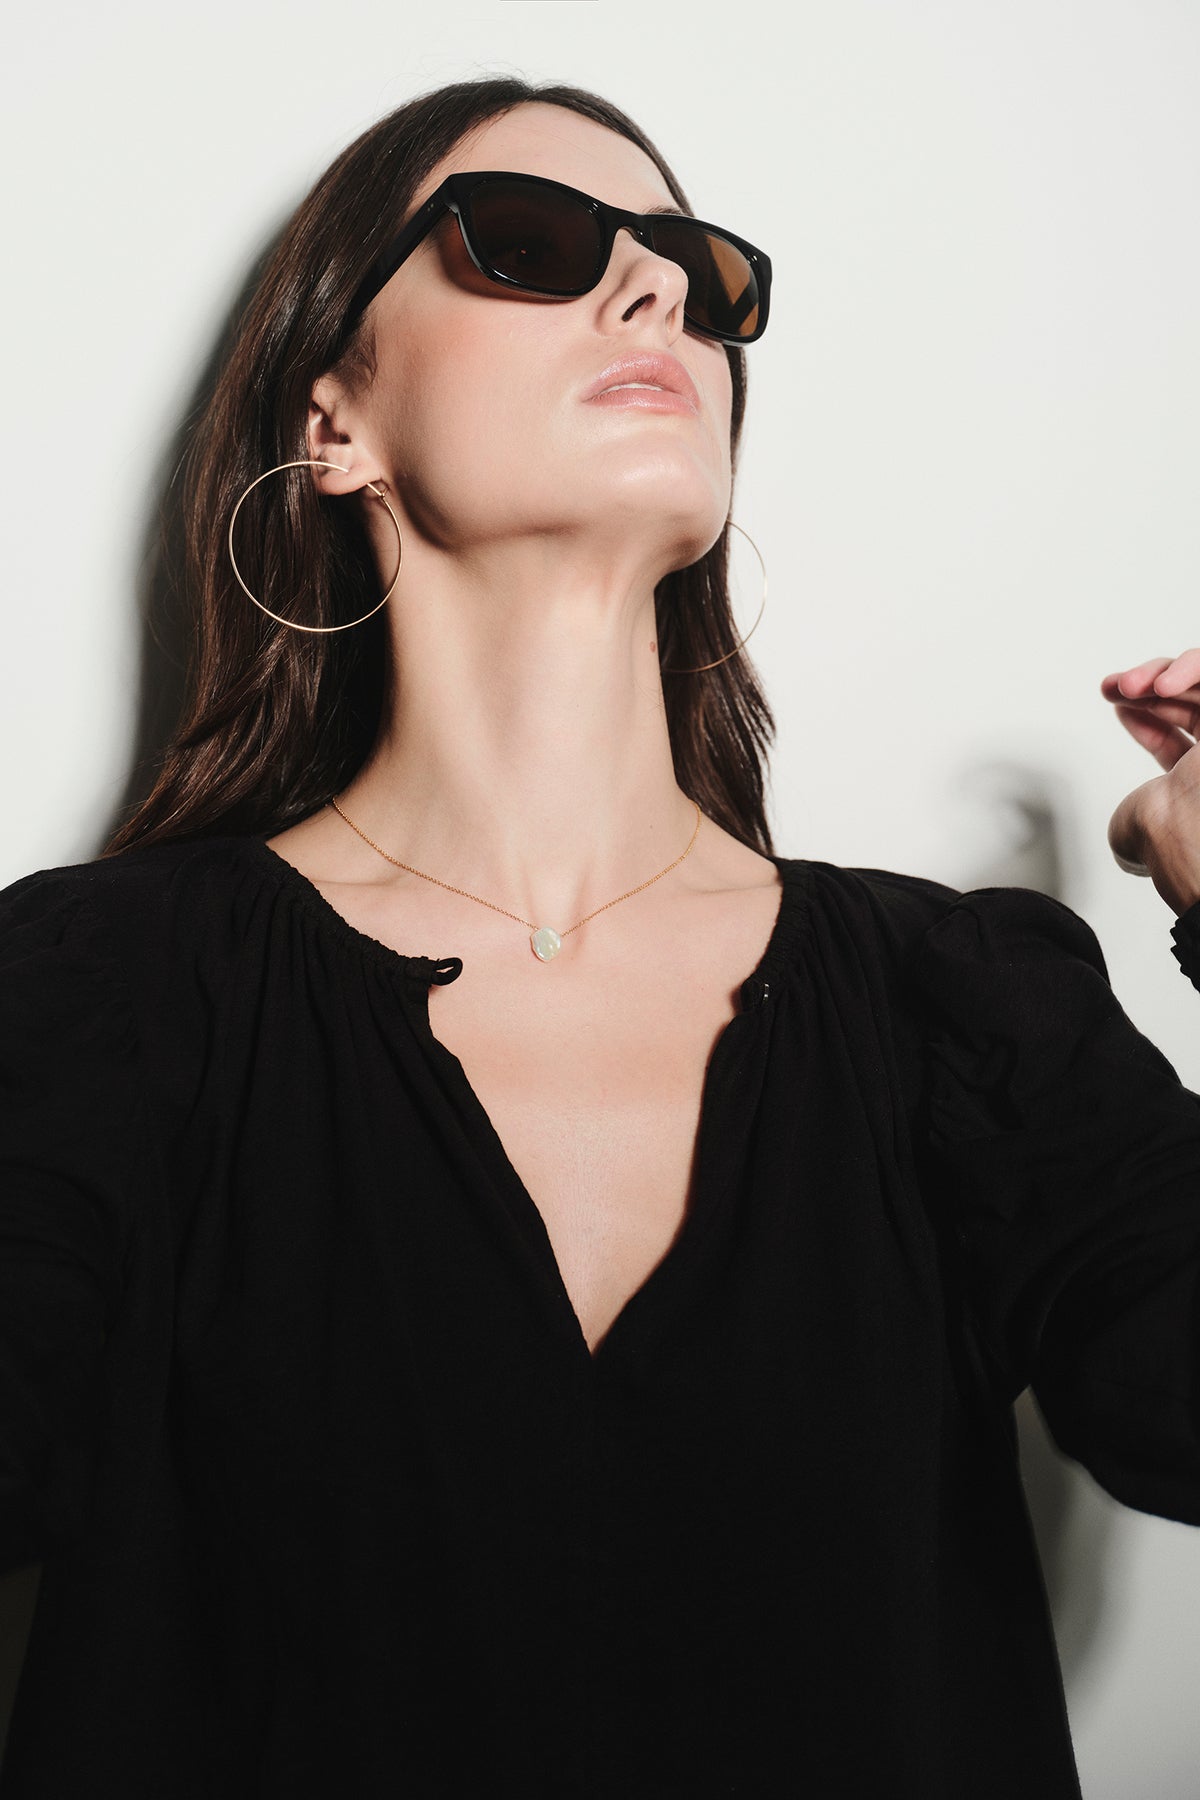   A woman wearing BYCHARI sunglasses and a black top. 